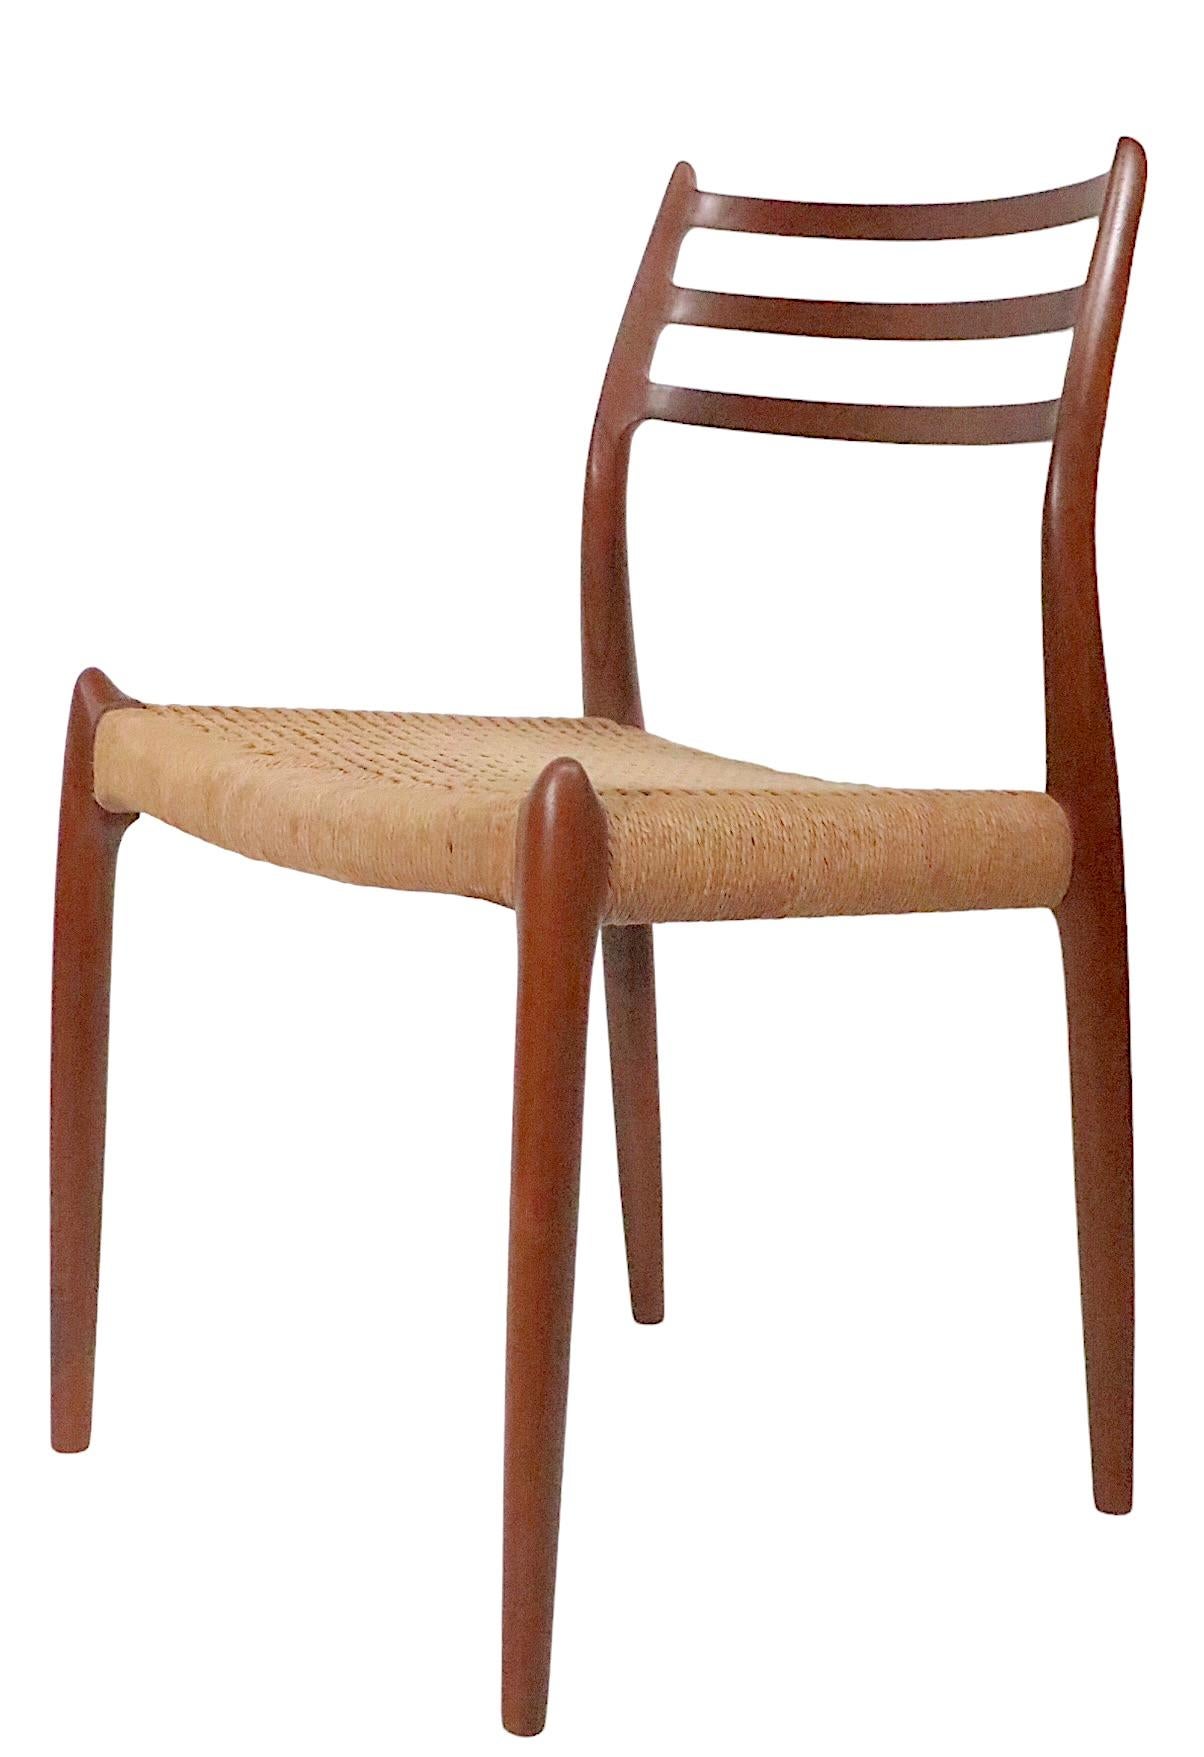 Danish Set of Eight Teak Dining Chairs by Neils Moller / J.L.Moller, circa 1960s For Sale 3